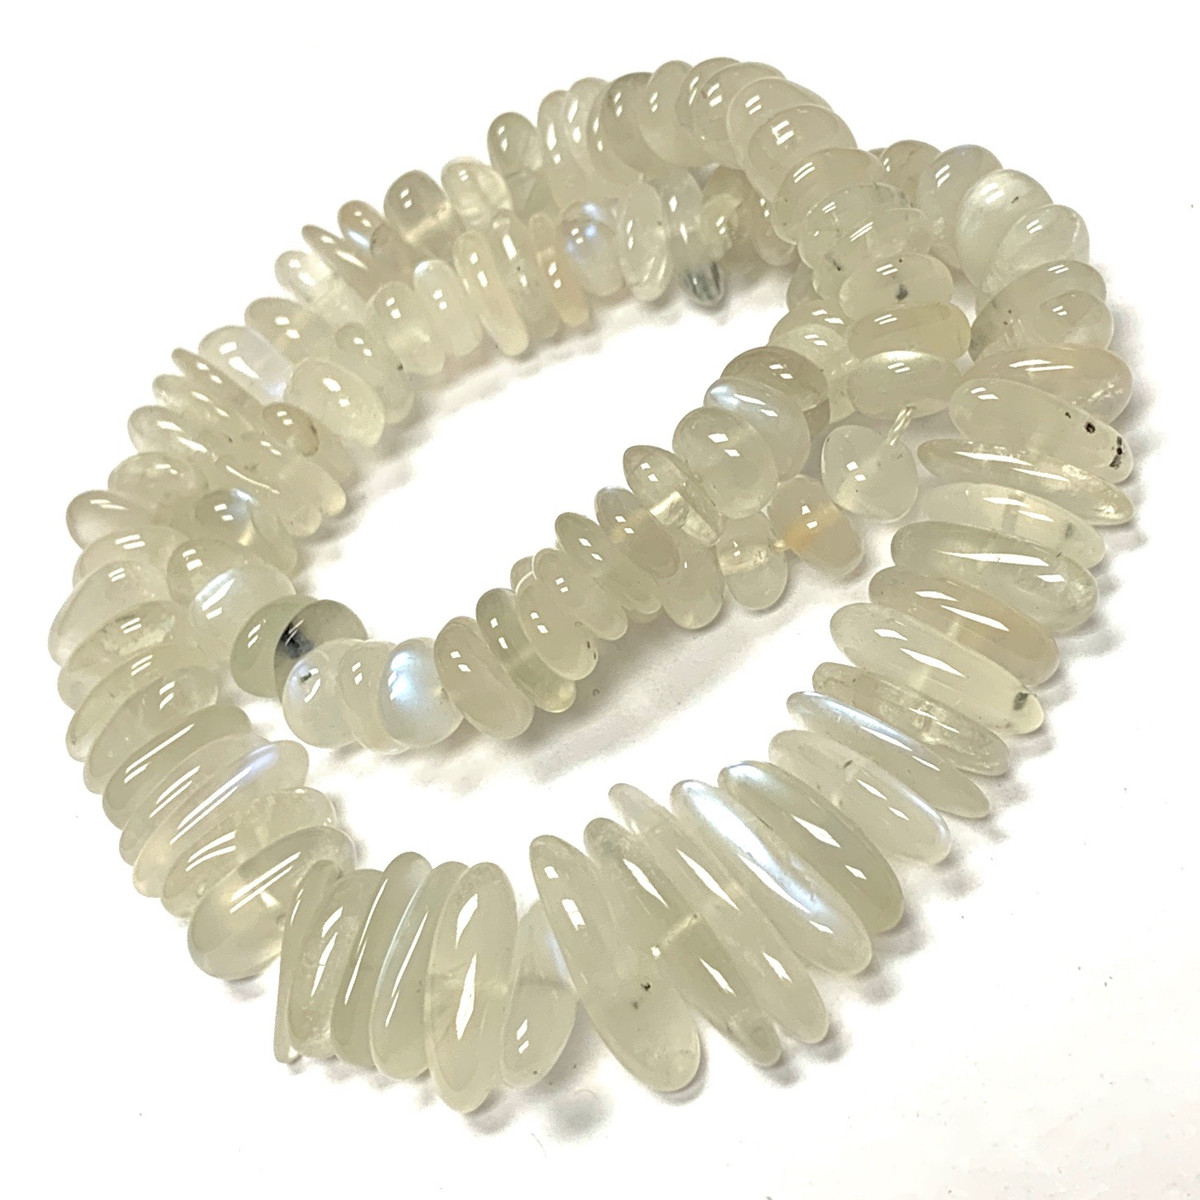 Moonstone Tumbled and Polished Graduated Nugget Beads 